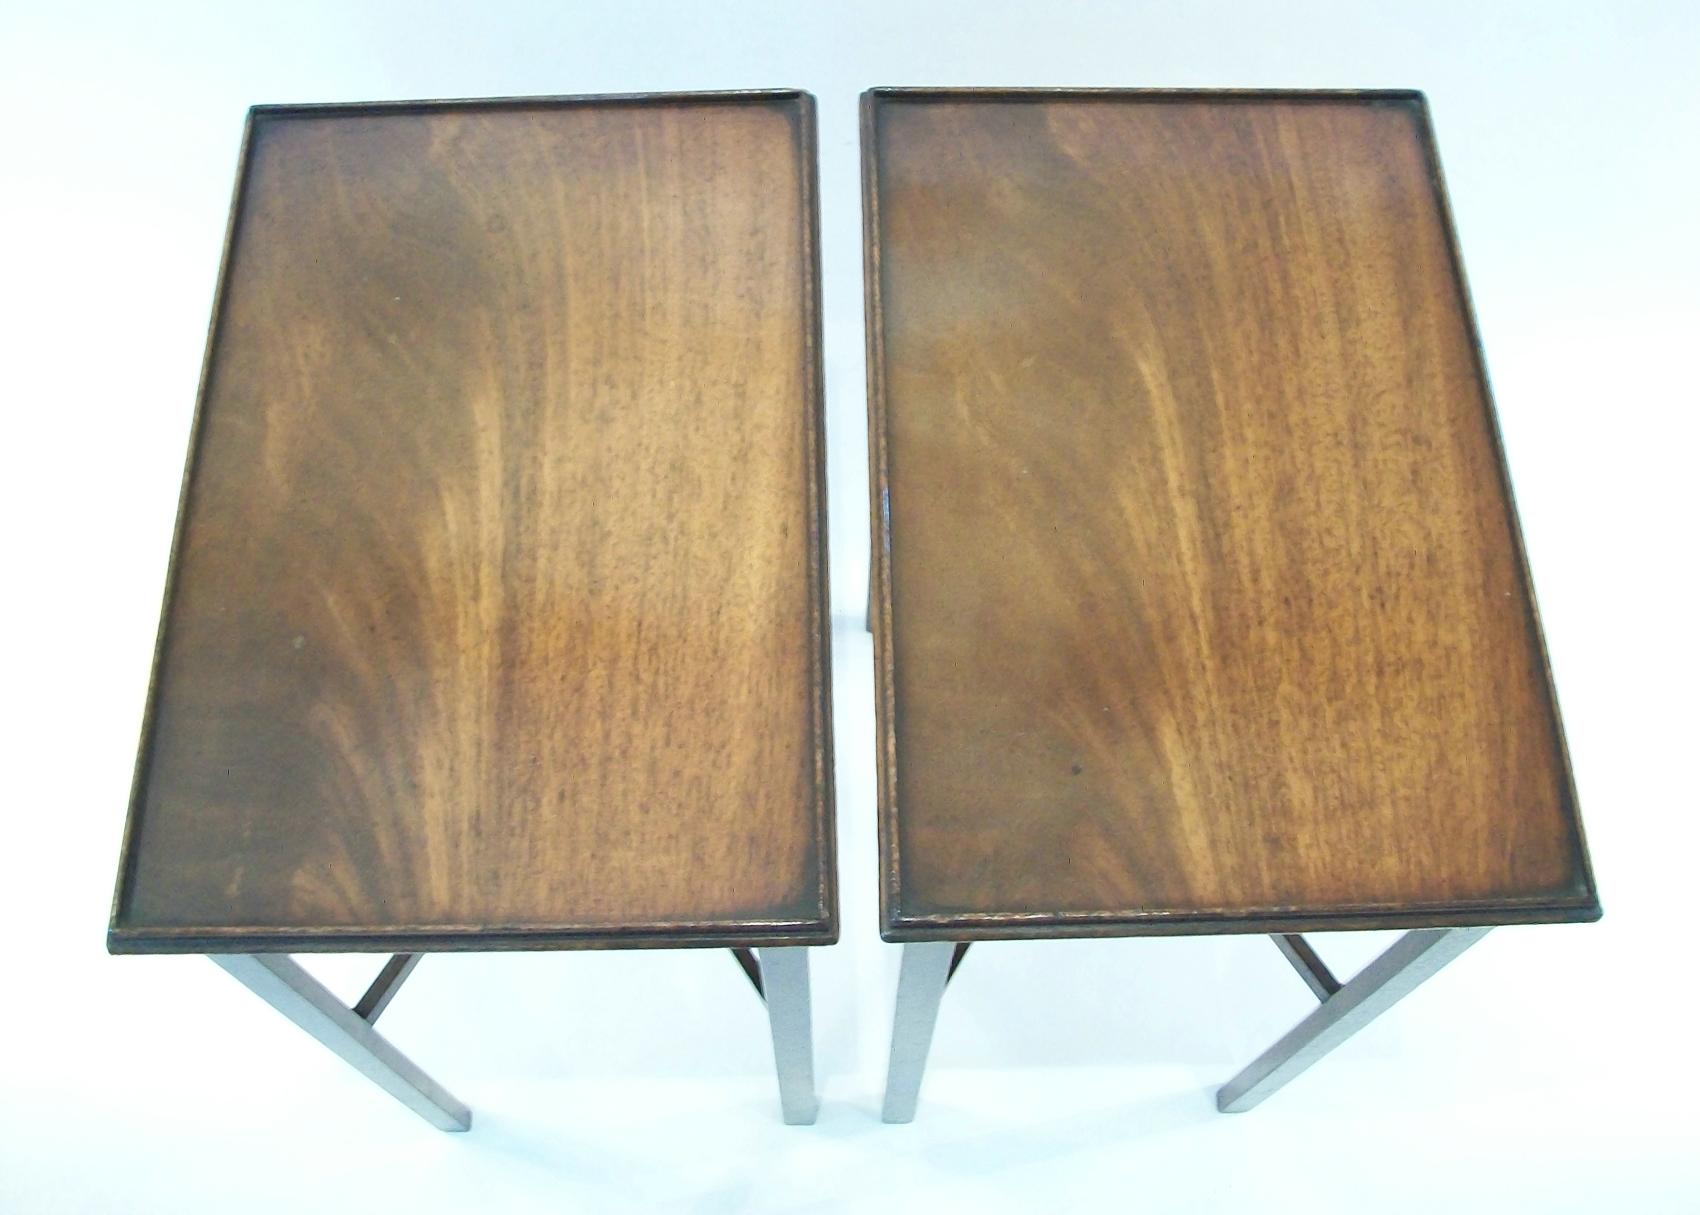 20th Century Fine Pair of Georgian Style Flamed Hardwood Side Tables - U.K. - Circa 1950's For Sale